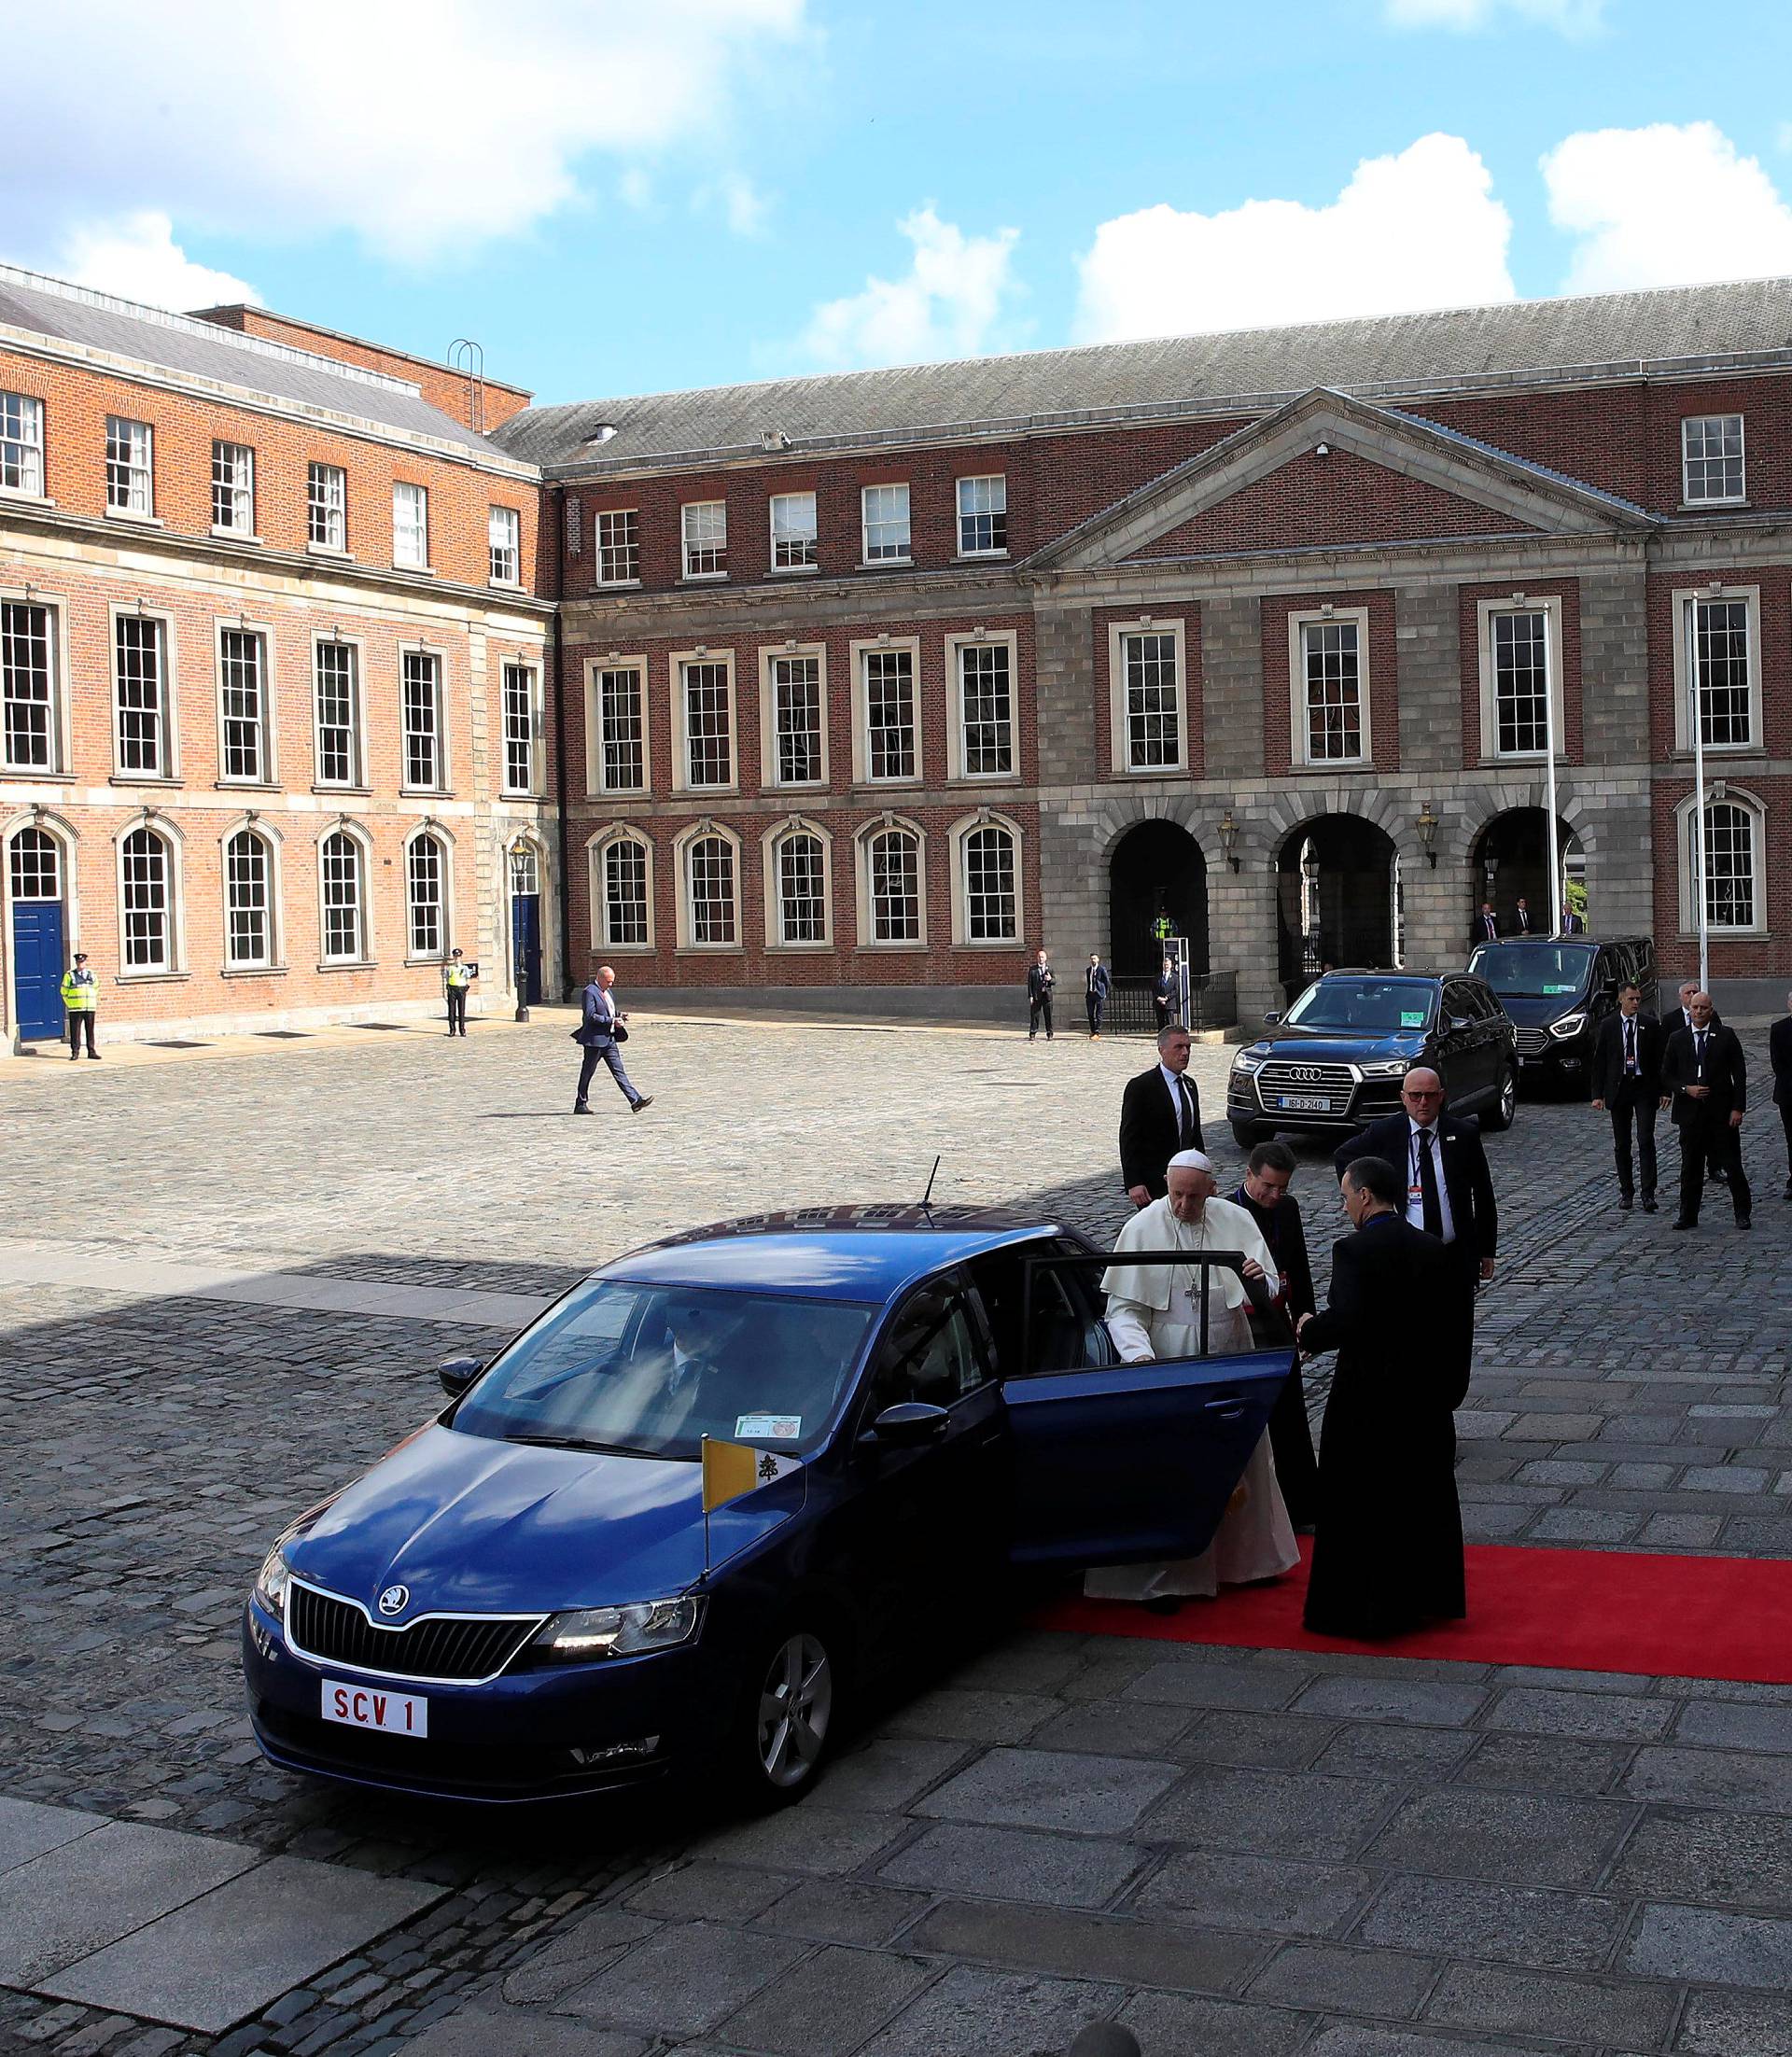 Pope Francis arrives at Dublin Castle during his visit to Dublin